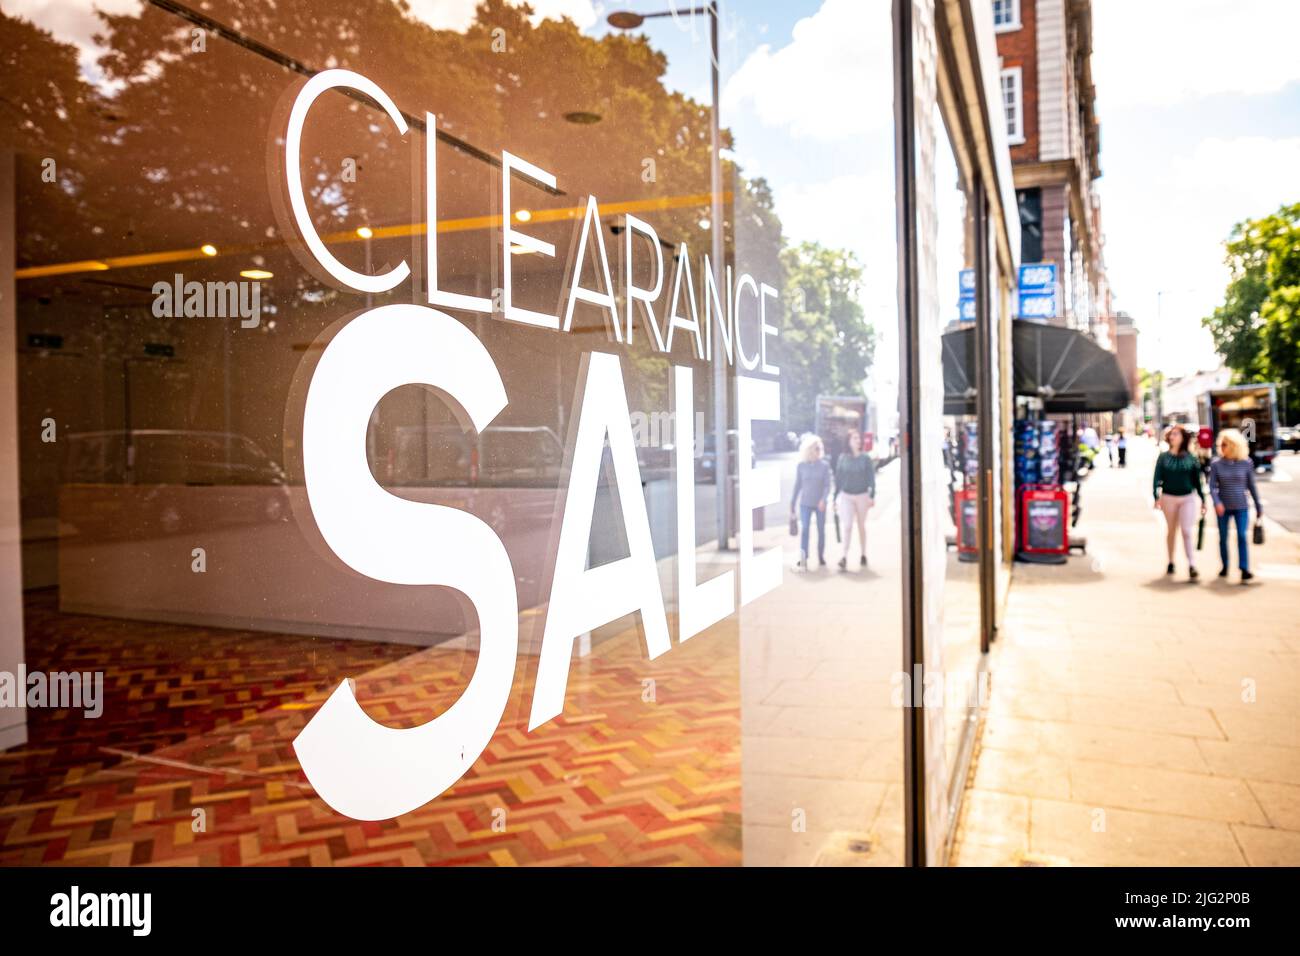 Empty shop window with ‘Clearance Sale’ text Stock Photo